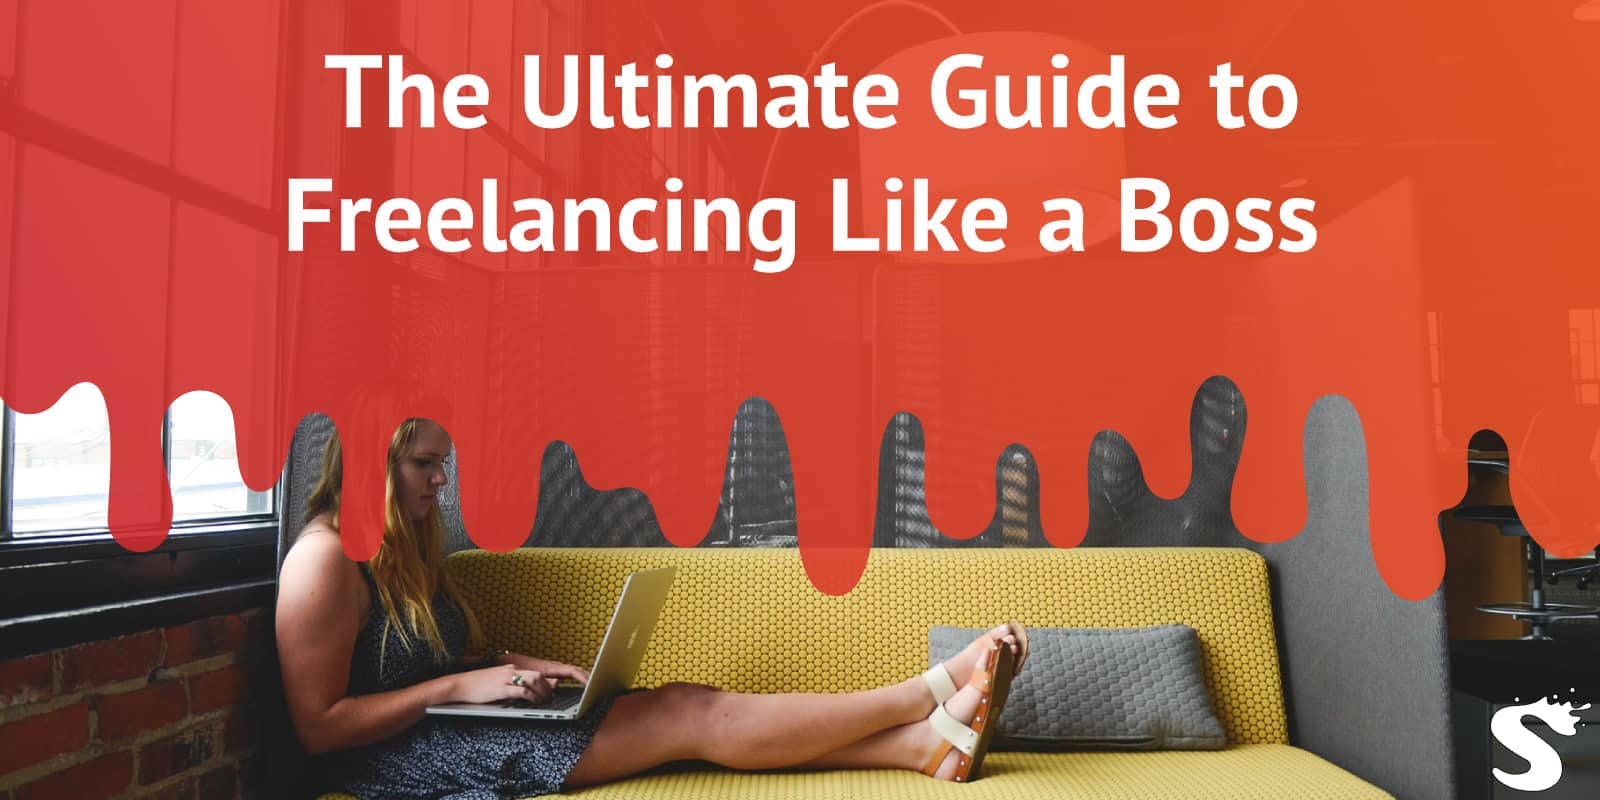 The Ultimate Guide to Freelancing Like a Boss